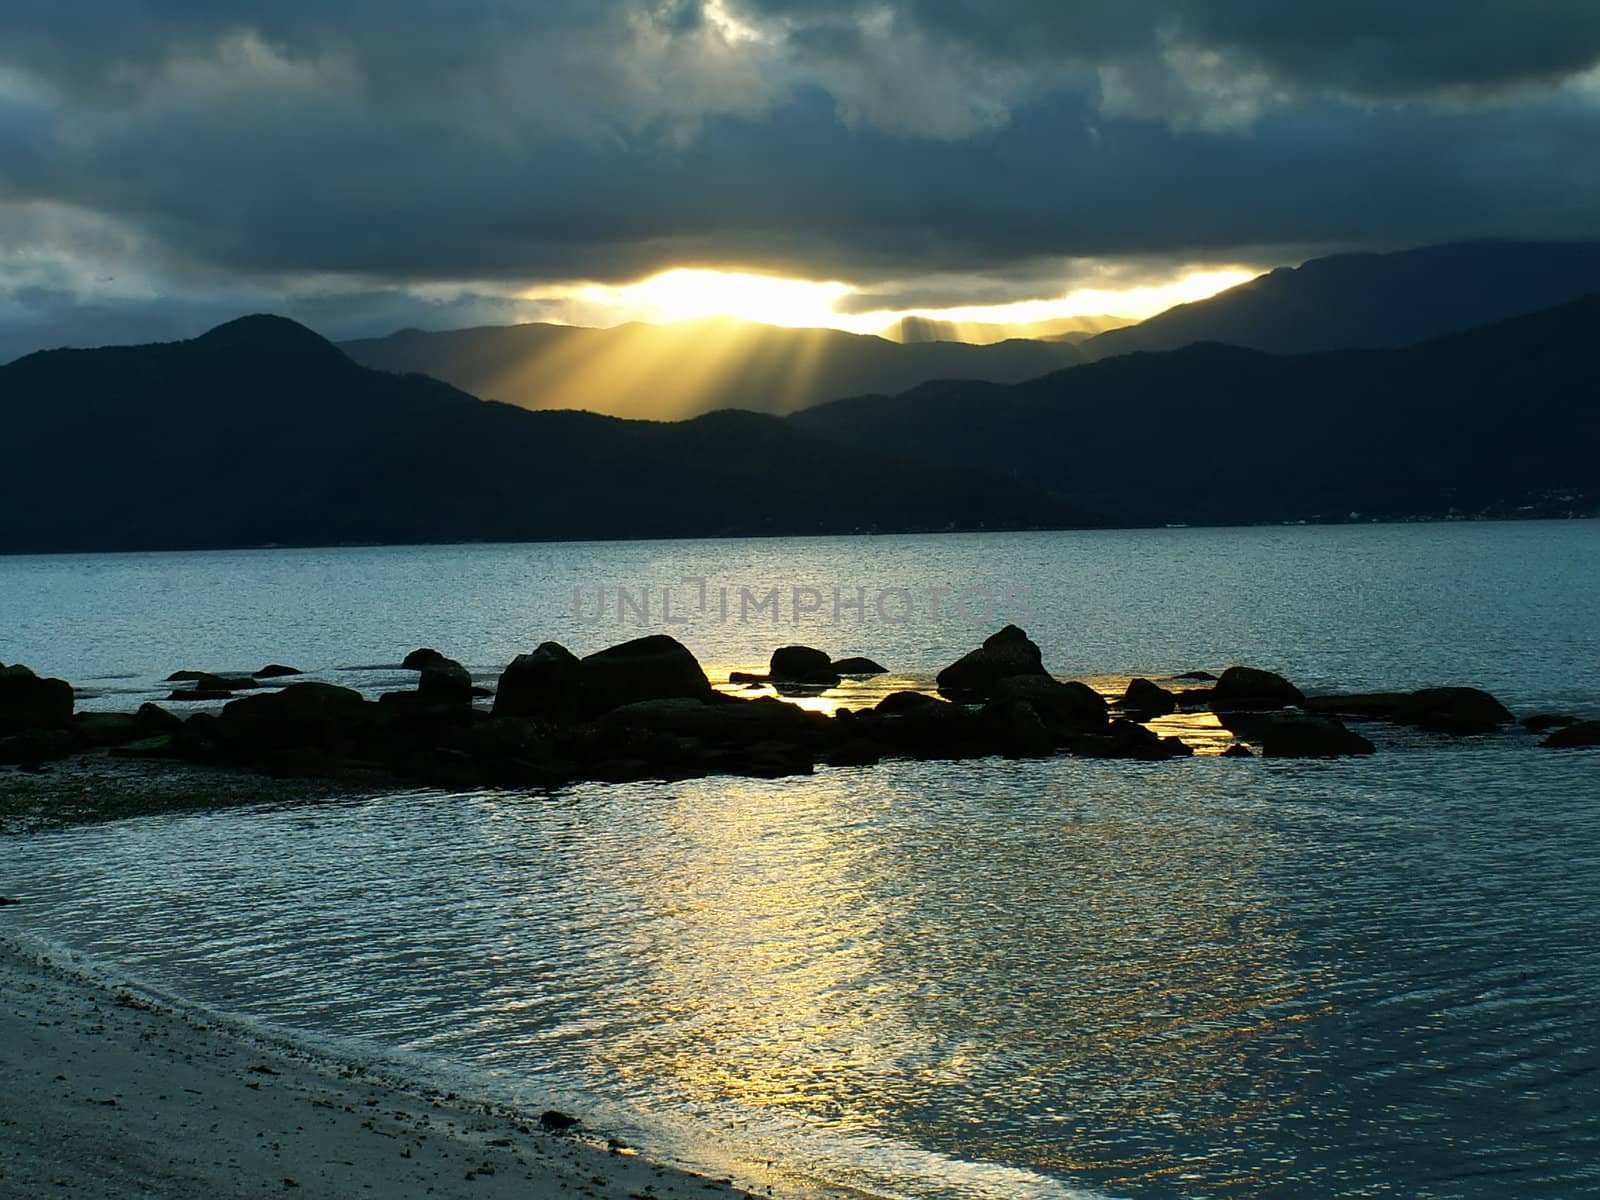 Yellow sun rays through clouds, passing over the mountains and making a nice reflection on the sea surface